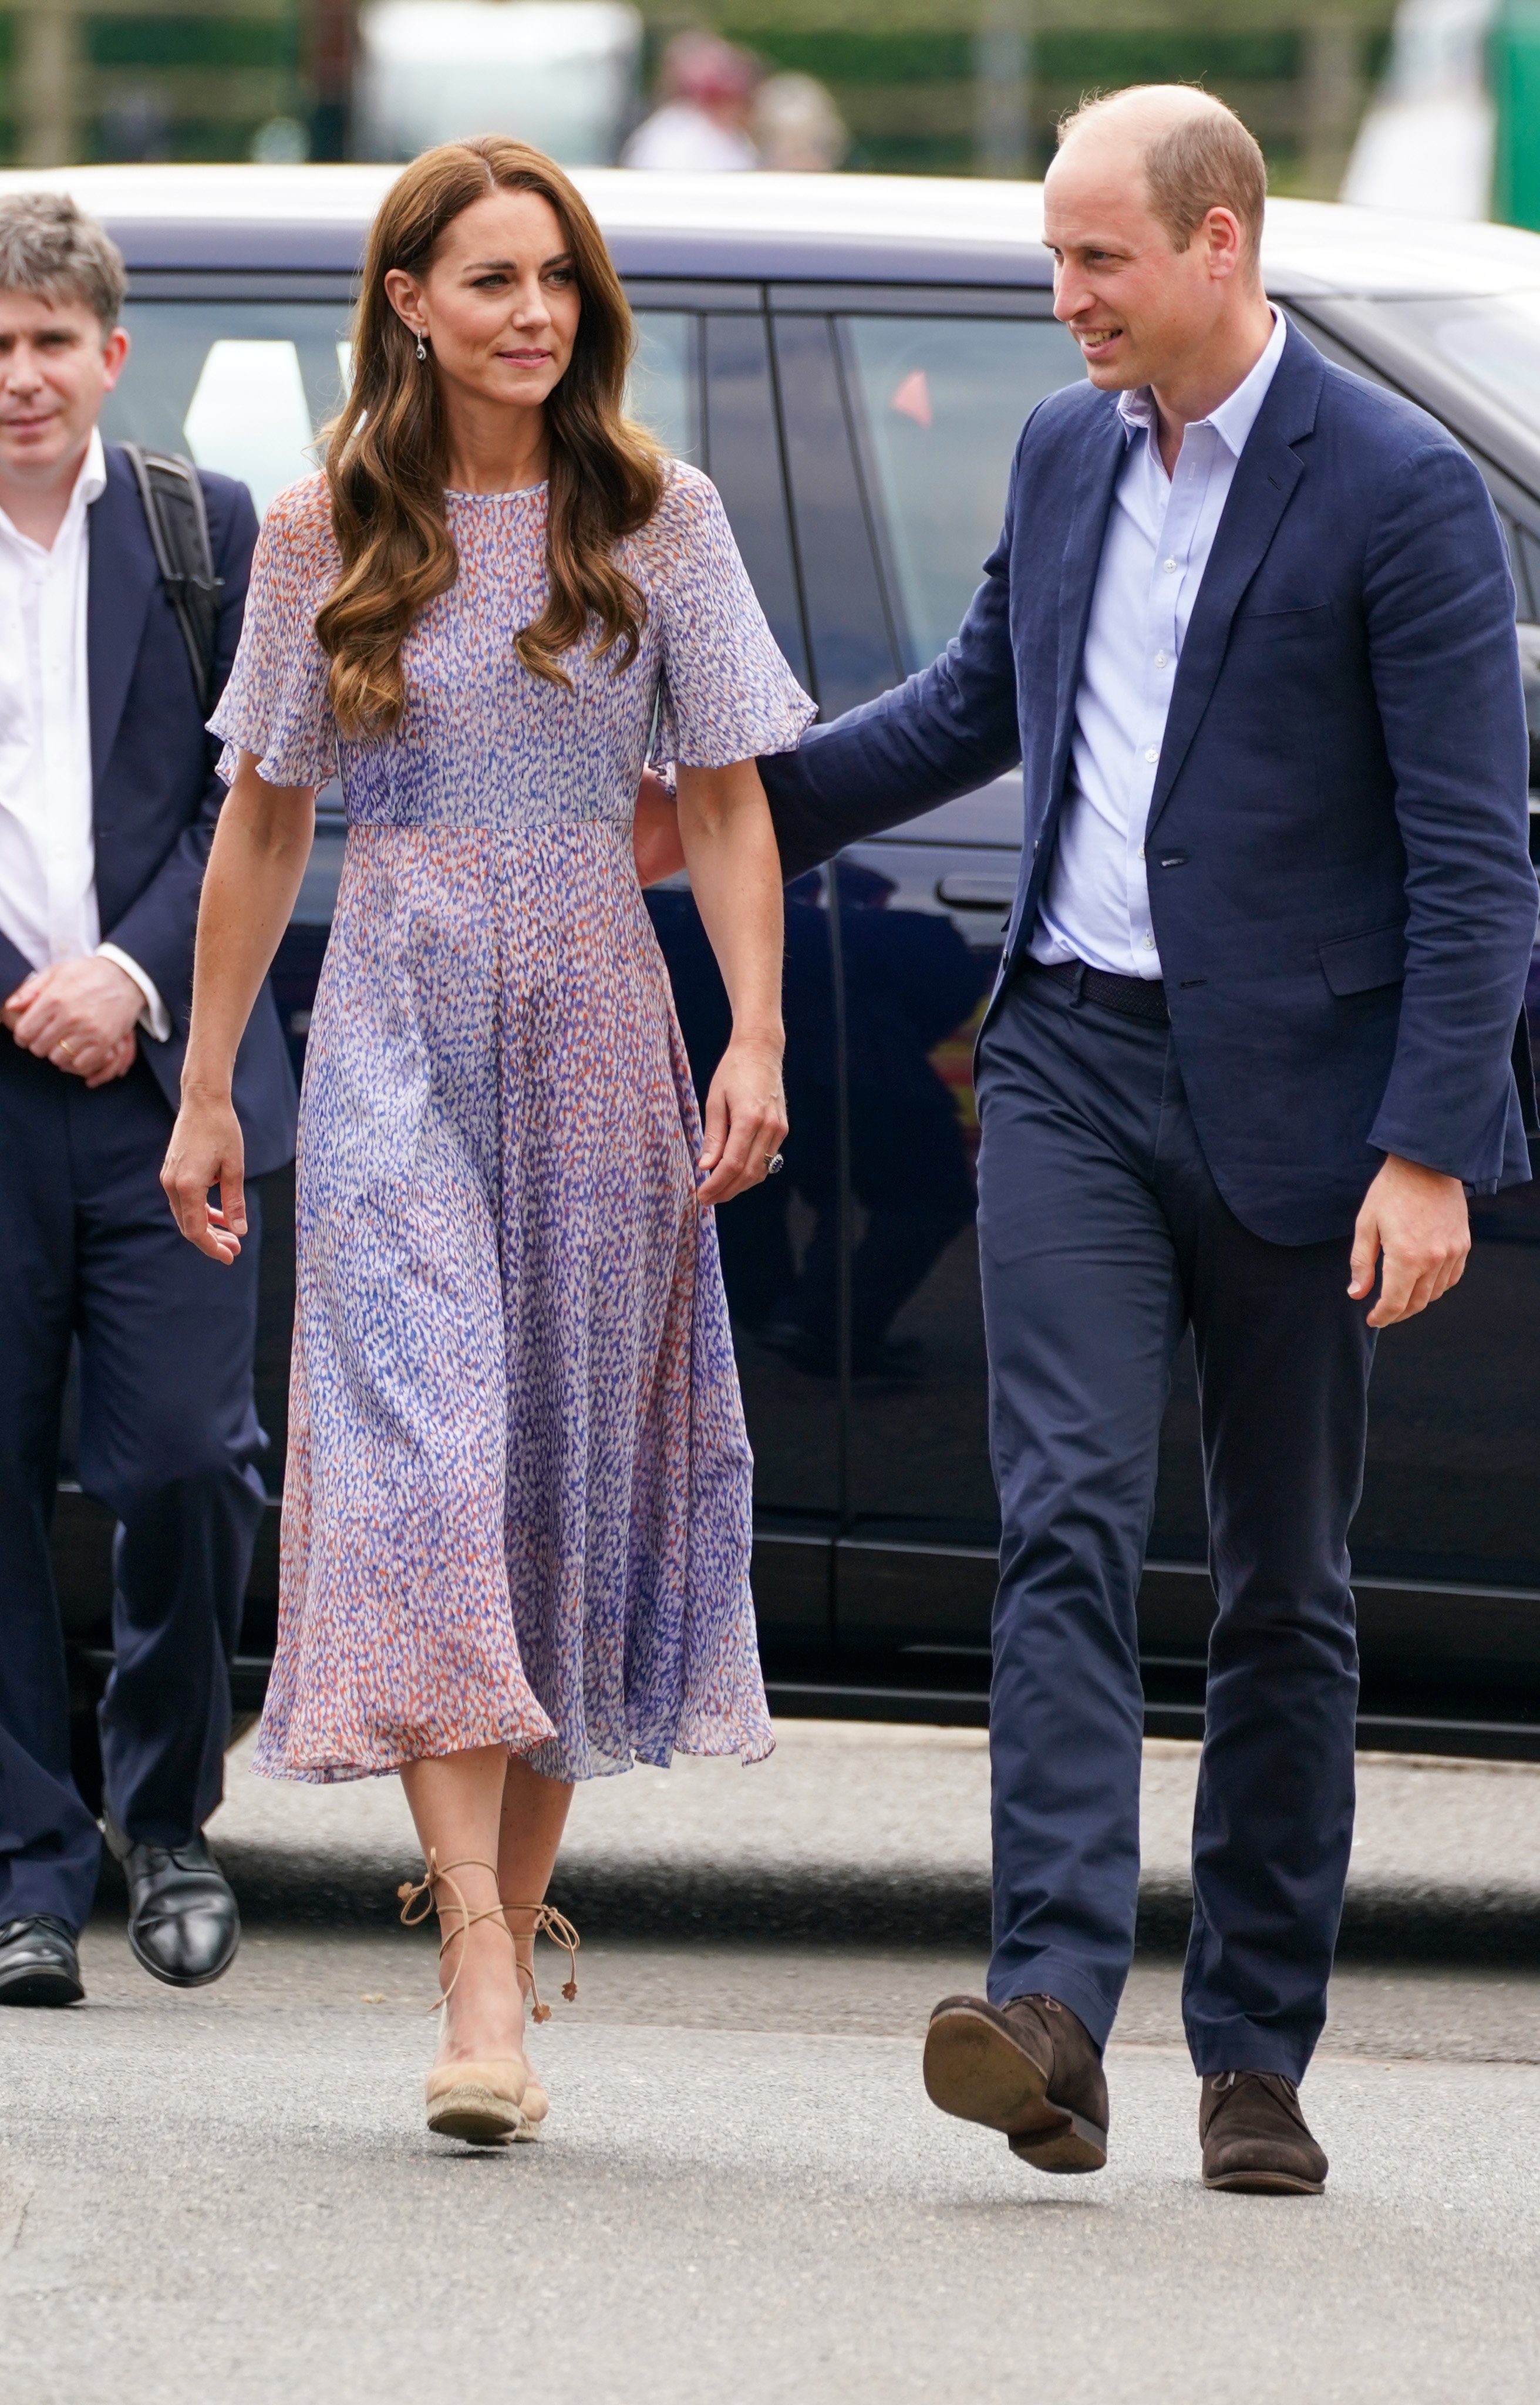 Prince William, Duke of Cambridge, and Catherine, Duchess of Cambridge, at Cambridgeshire County Day at Newmarket Racecourse during an official visit to Cambridgeshire on June 23, 2022, in Cambridge, England. | Source: Getty Images